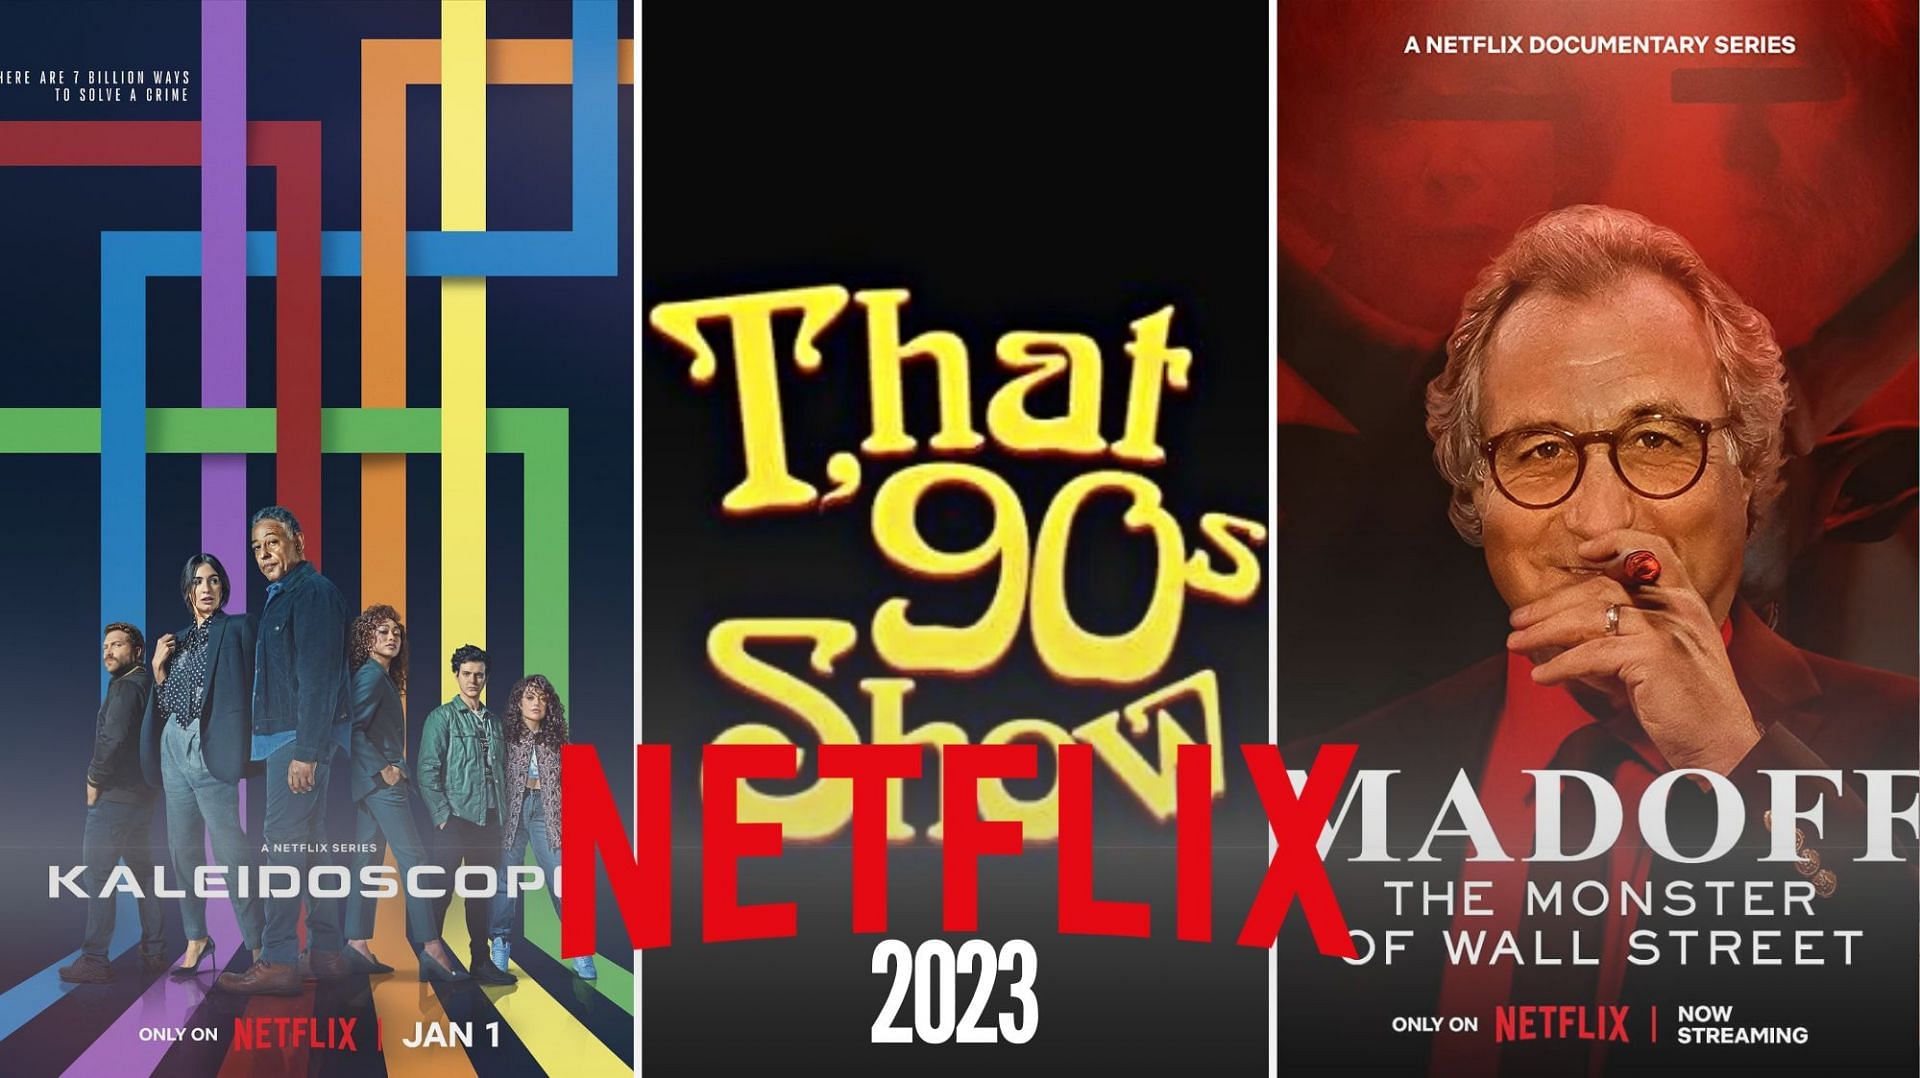 The best new Netflix series released in 2023